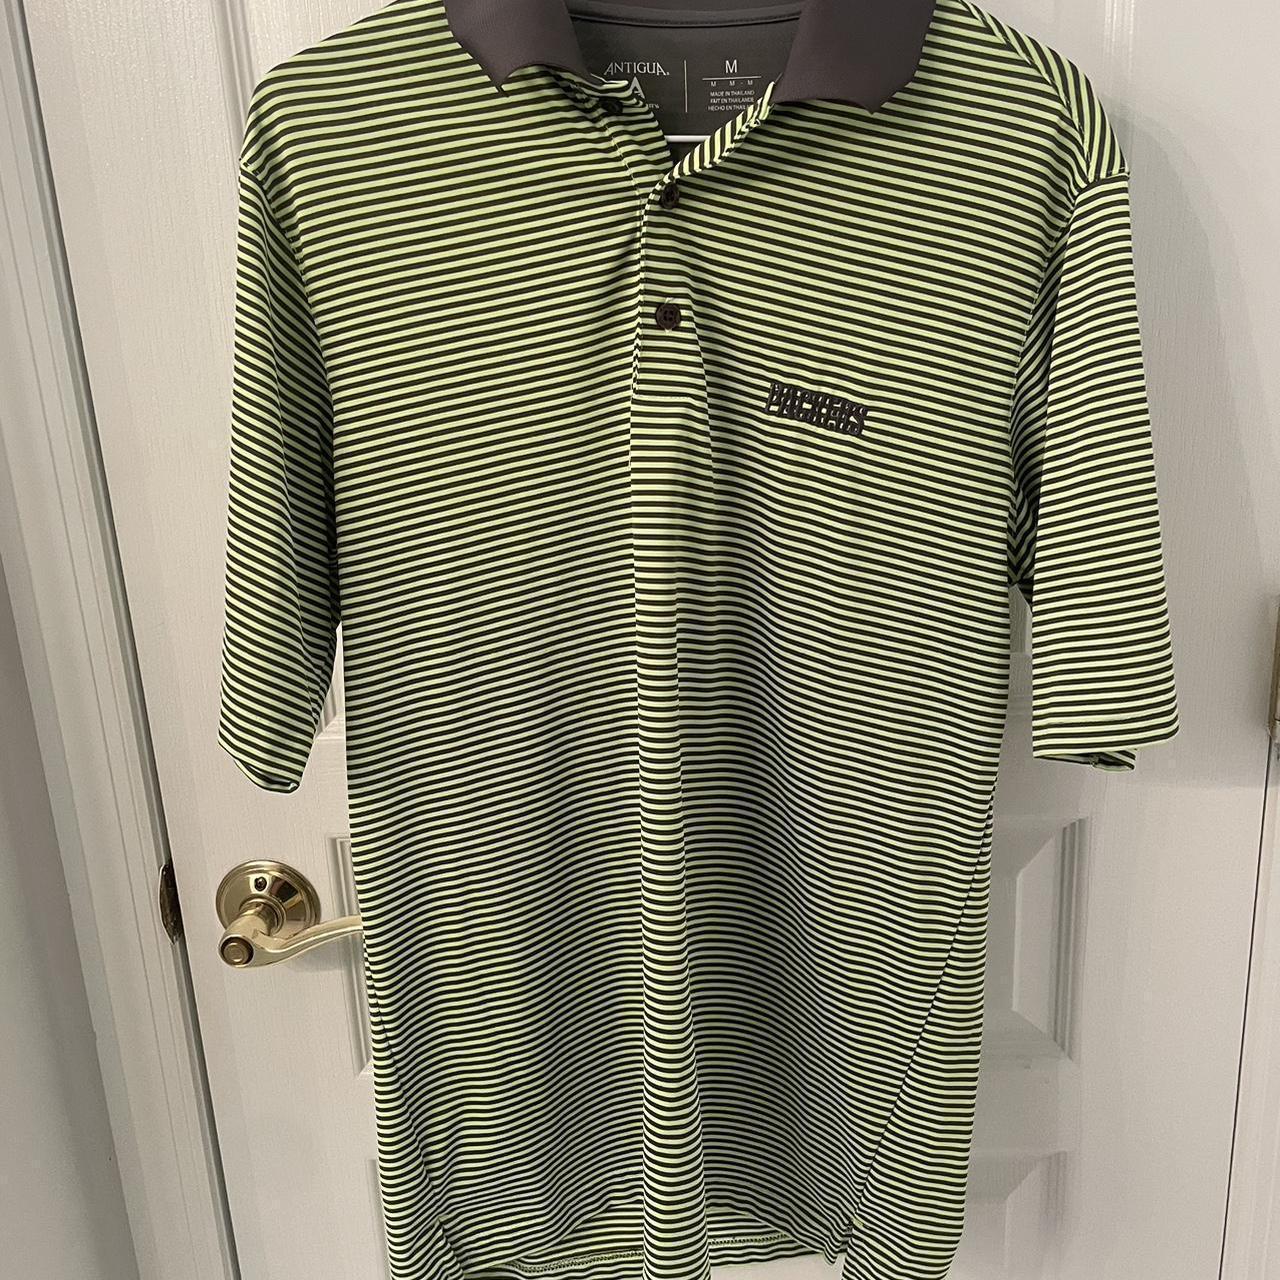 green bay packers golf polo